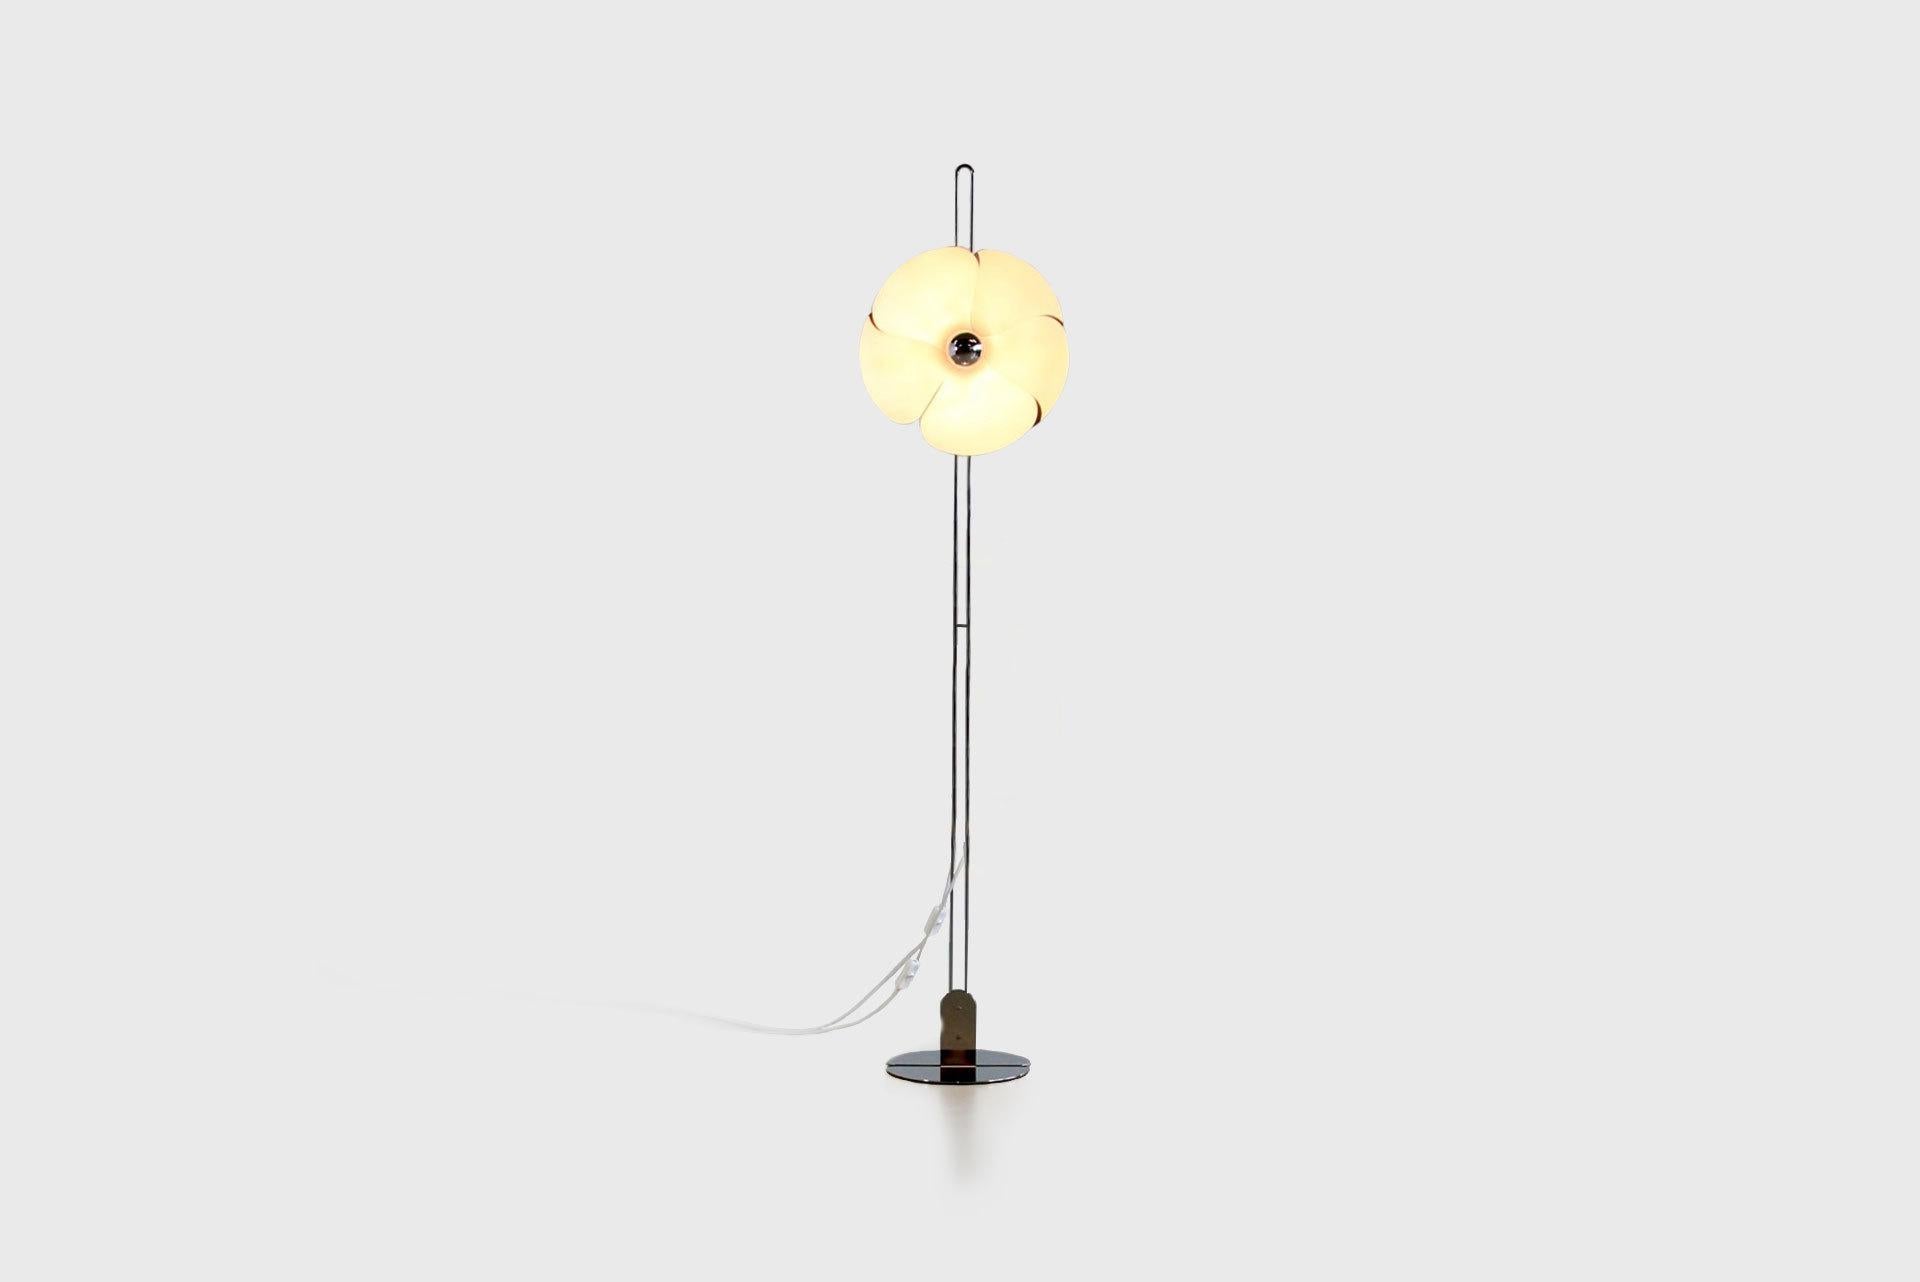 Floor lamp model “2093”
Manufactured by Disderot
France, 1970s
Enamel, chrome plated steel

Measurements
34,3 cm x 34,3 cm x 152,4h cm
13,5 in x 13,5 in x 60h in

Literature
Krzentowski, Clemence & Didier: The Complete Designers‘ Lights (1950 -